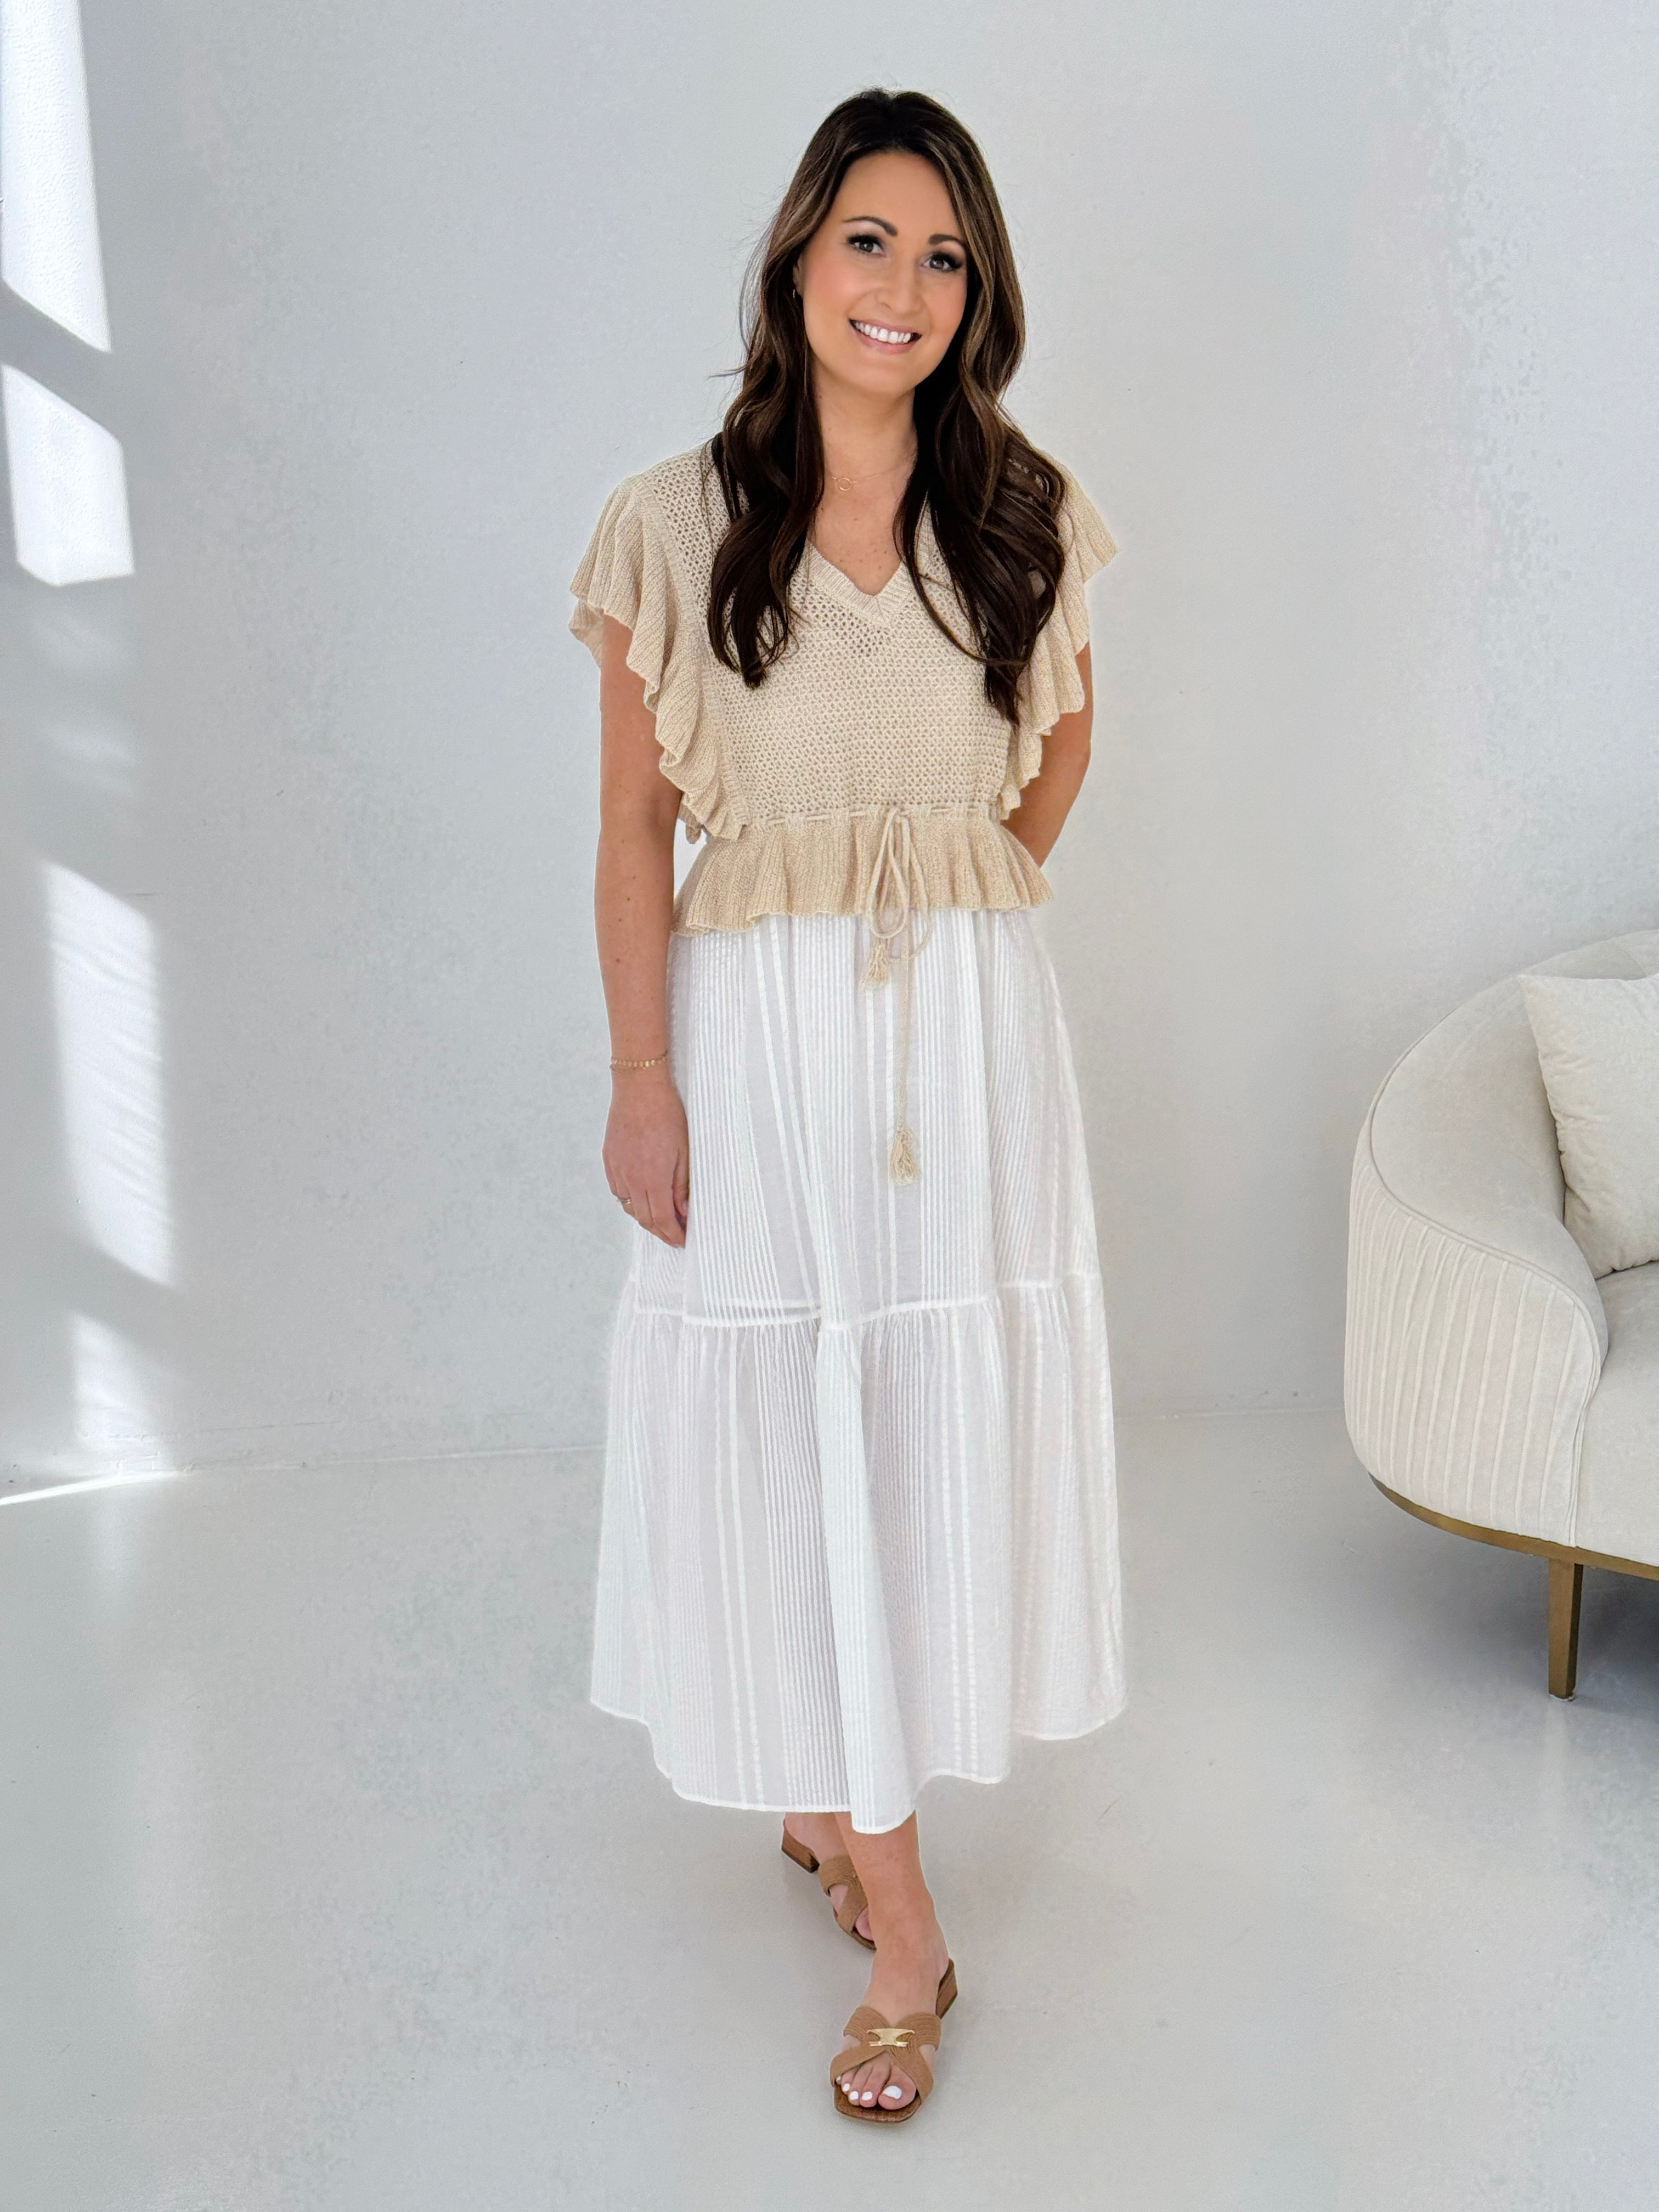 Elan Summer Maxi Dress With Knit Top Set in White and Beige-152 Dresses - Long-Little Bird Boutique